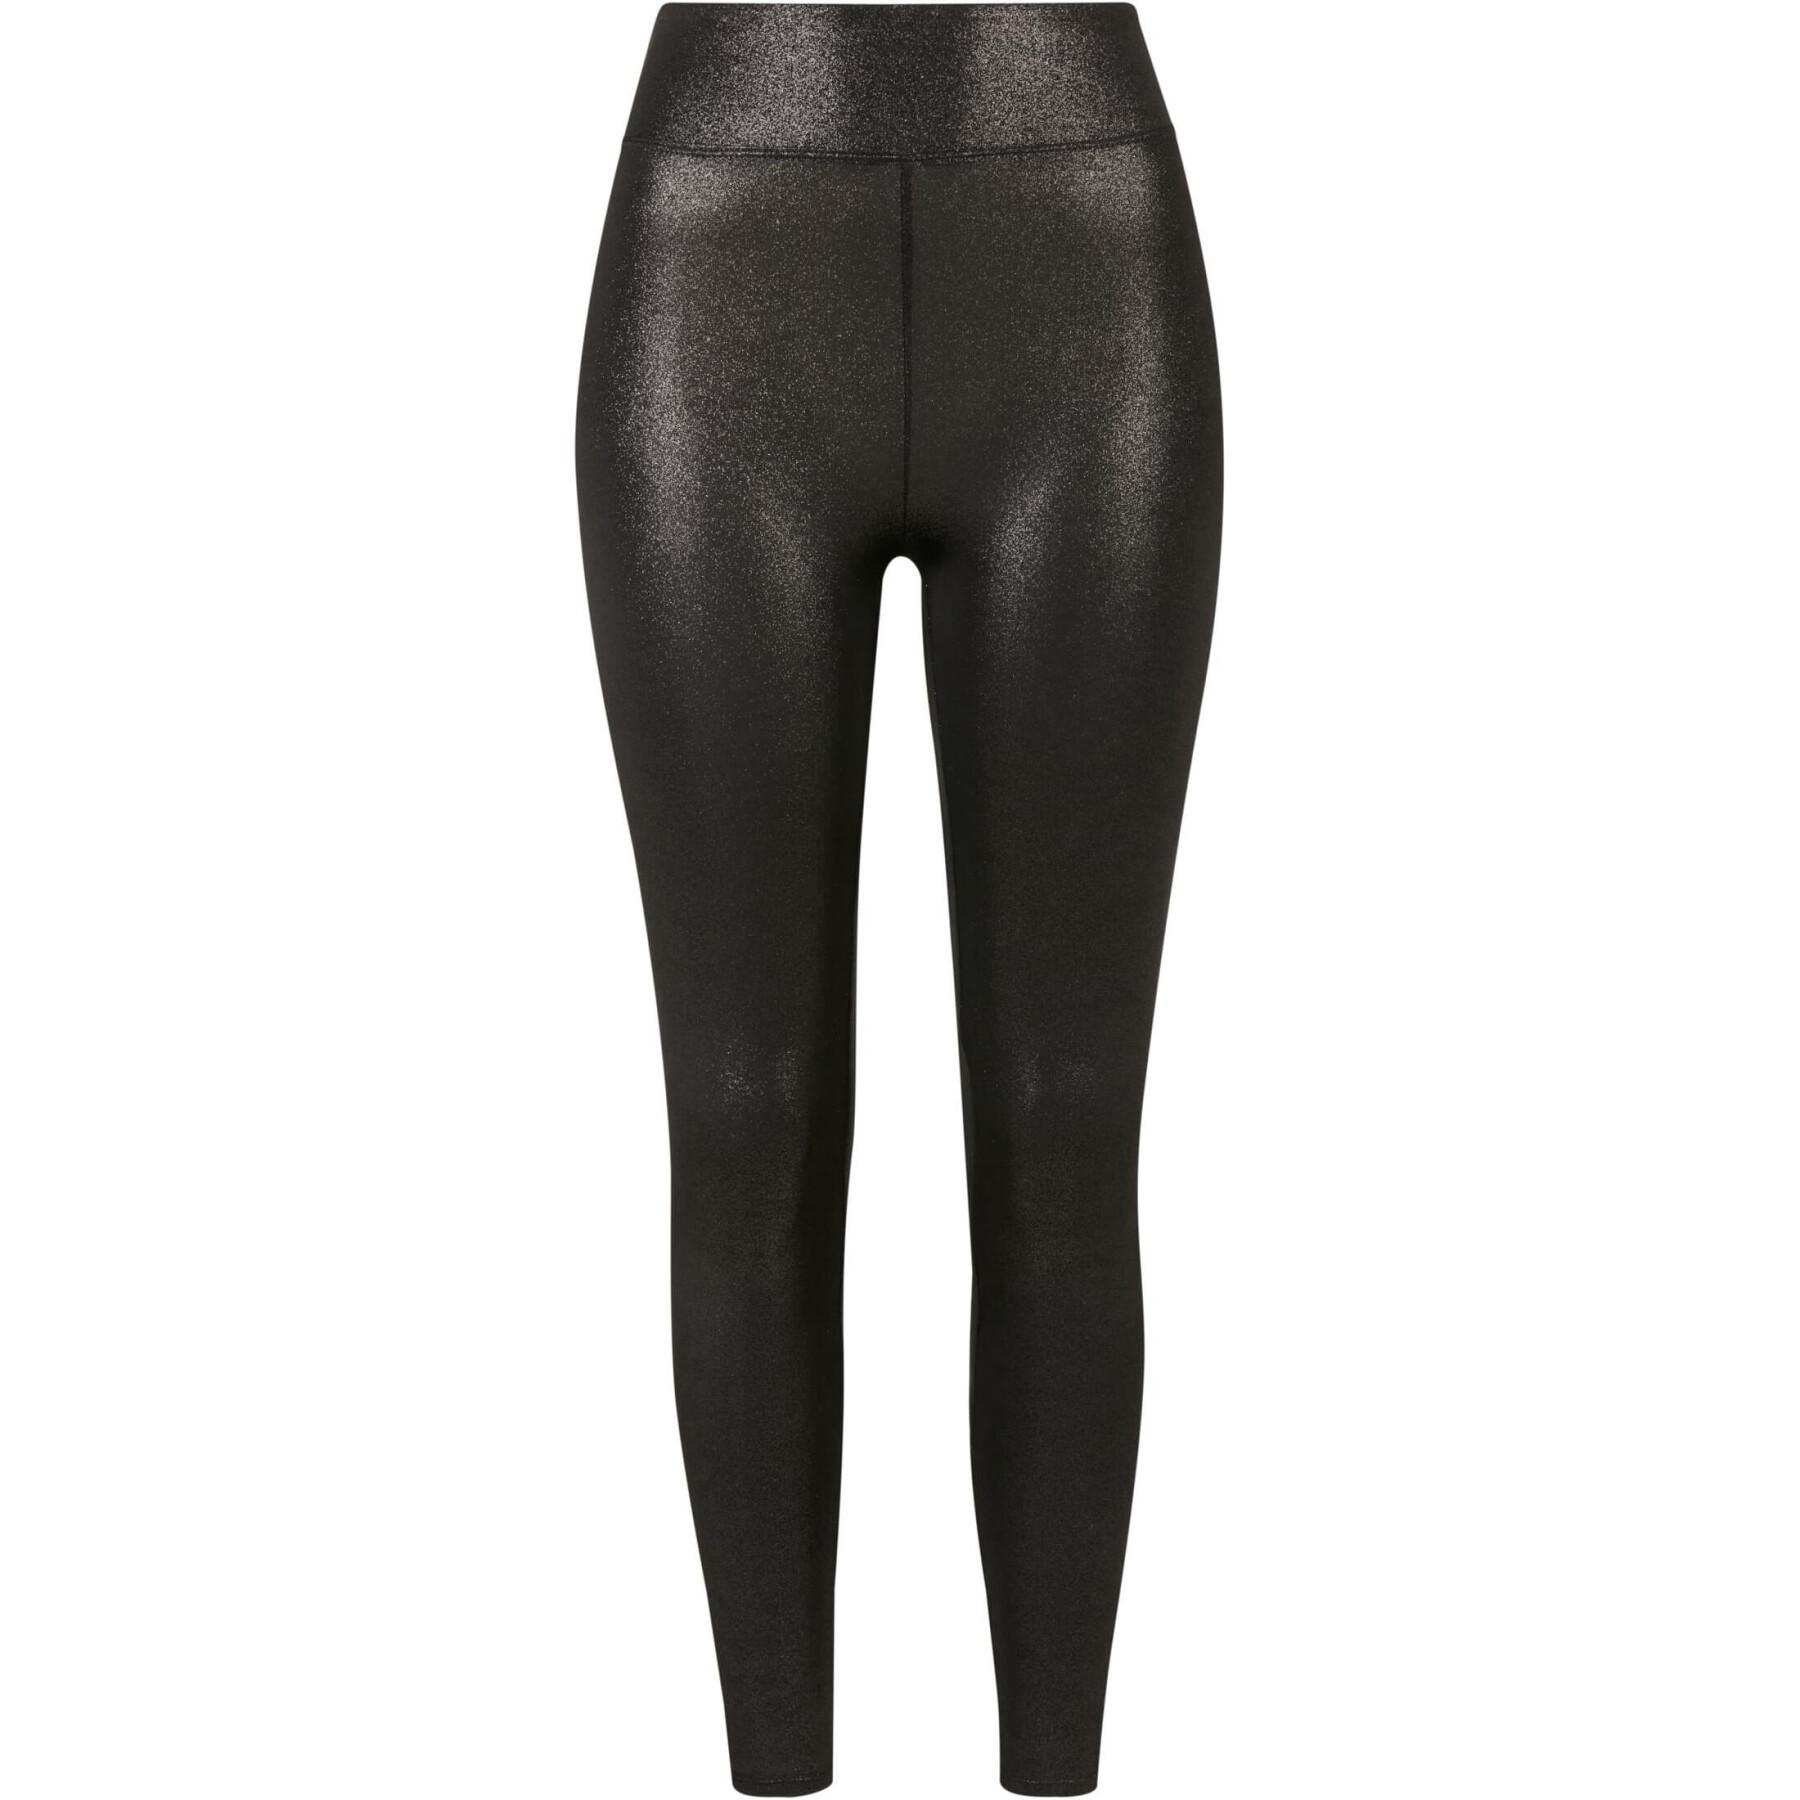 M&S' 'waist-defining' leather look leggings shoppers say 'hides cellulite'  are back - Mirror Online